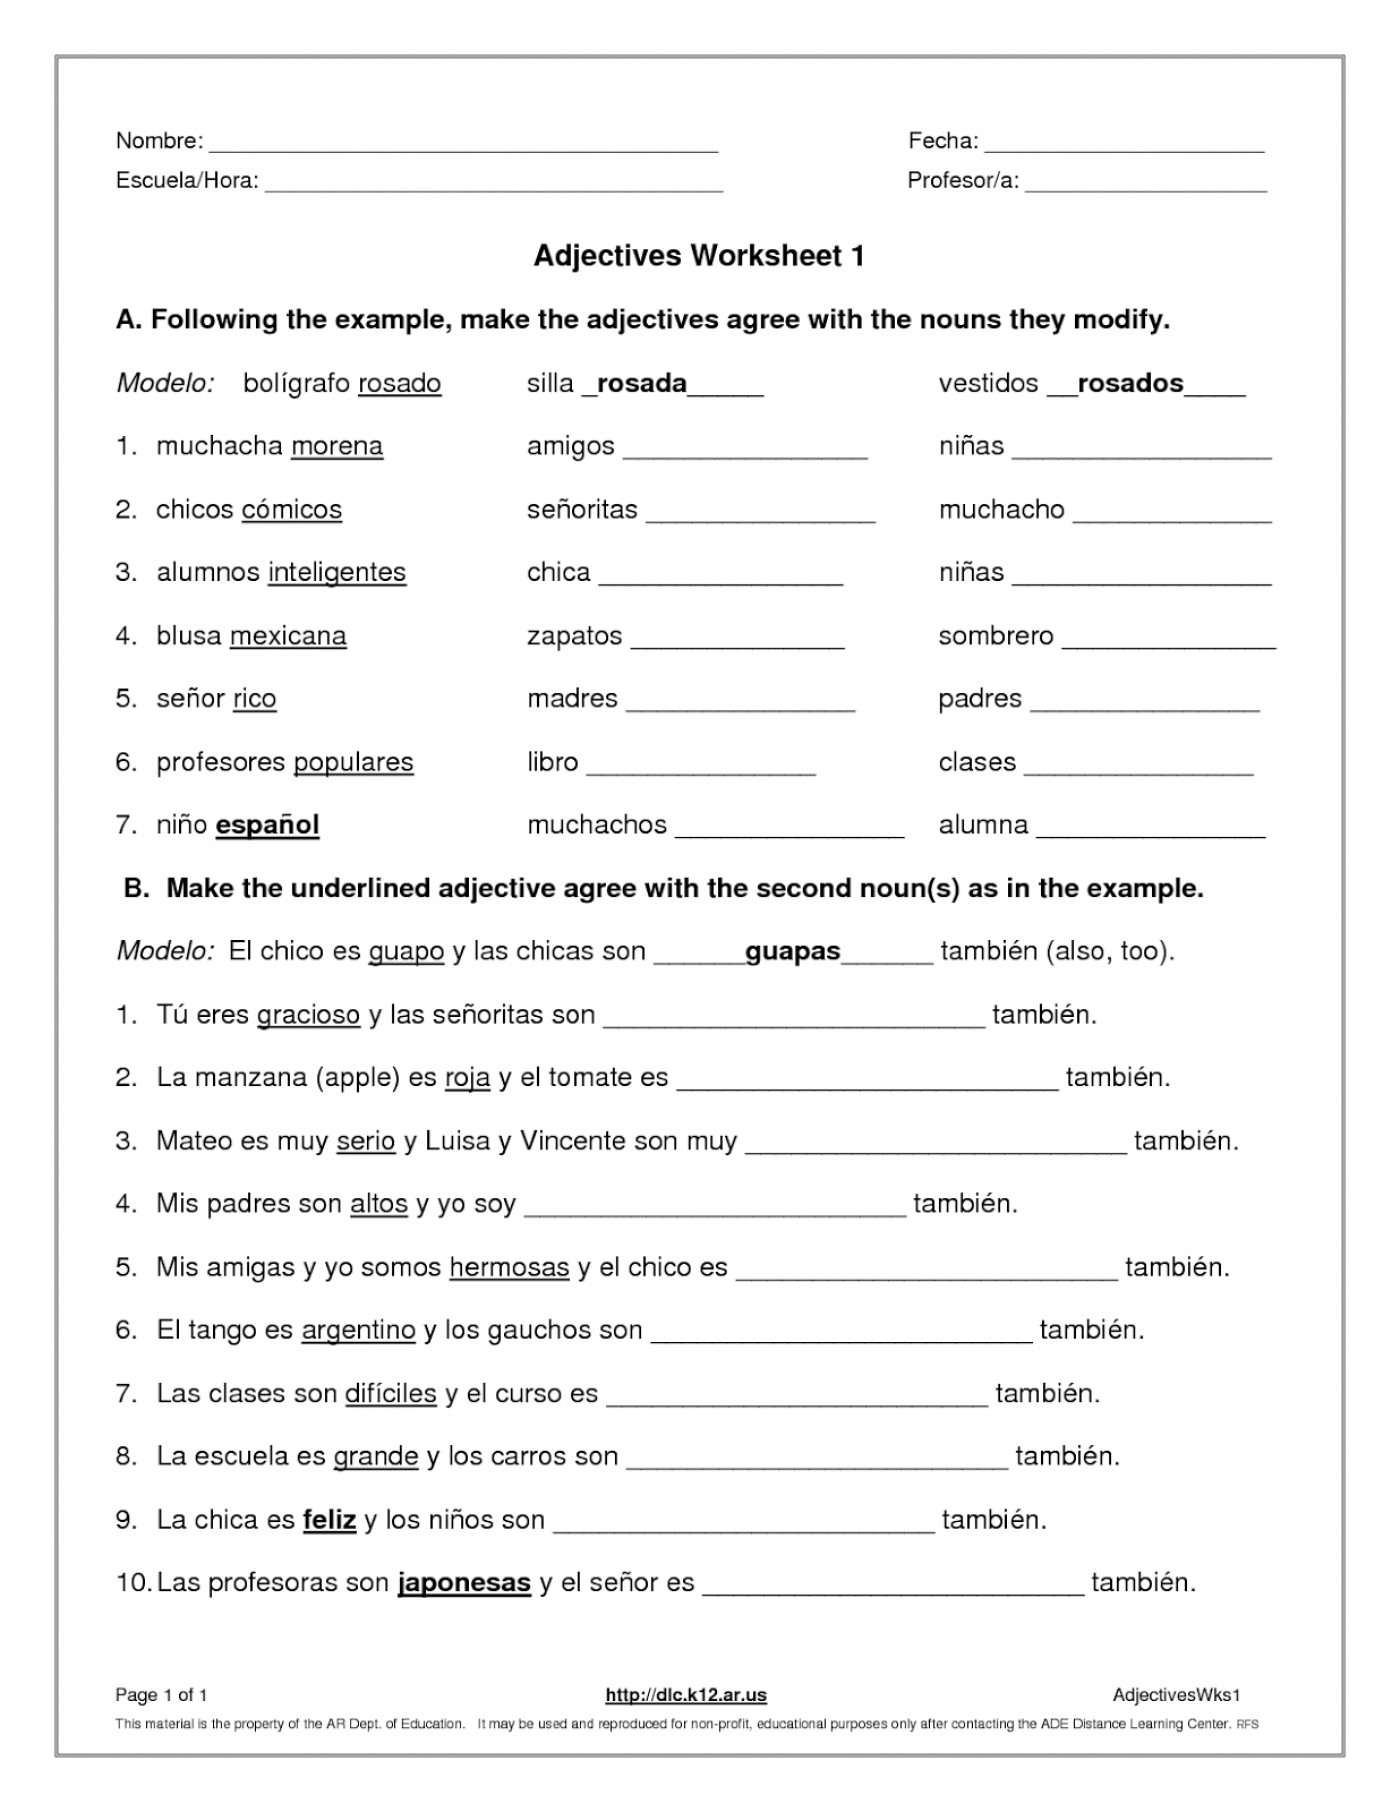 spanish-worksheet-answers-db-excel